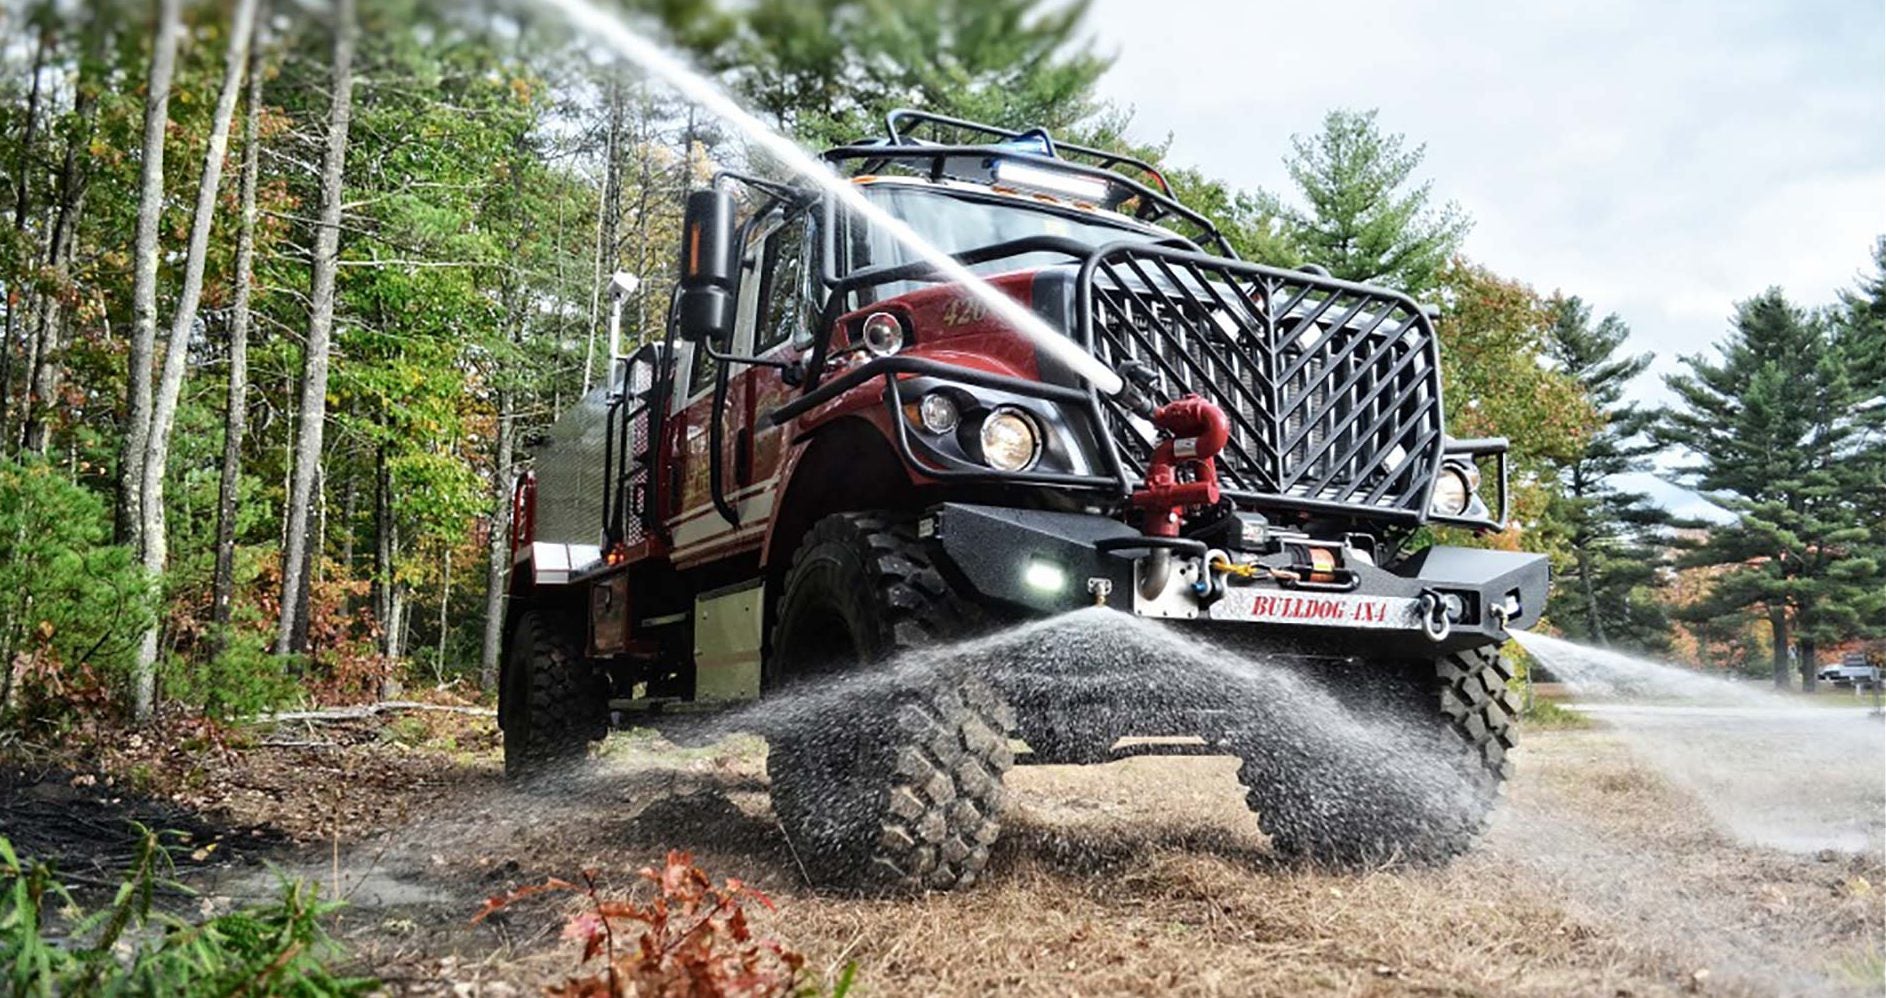 Bulldog 4X4 Extreme Is The Off-Road Fire Truck Of Our Dreams